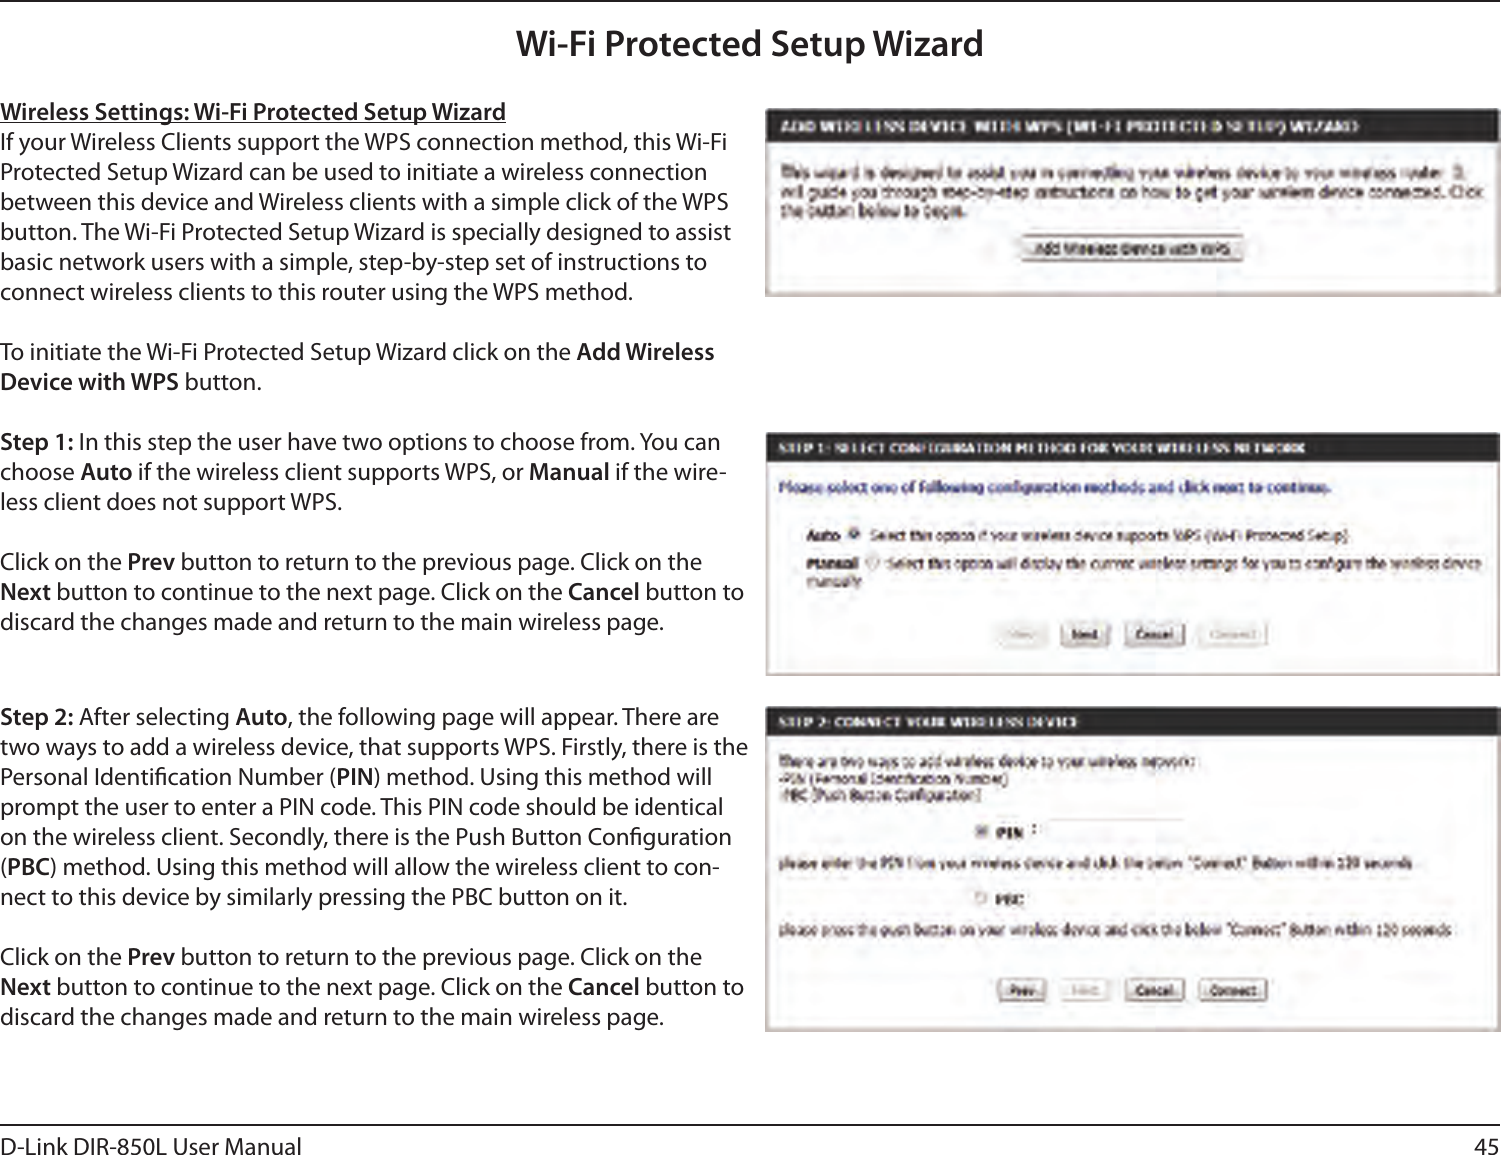 45D-Link DIR-850L User ManualWireless Settings: Wi-Fi Protected Setup WizardIf your Wireless Clients support the WPS connection method, this Wi-Fi Protected Setup Wizard can be used to initiate a wireless connection between this device and Wireless clients with a simple click of the WPS button. The Wi-Fi Protected Setup Wizard is specially designed to assist basic network users with a simple, step-by-step set of instructions to connect wireless clients to this router using the WPS method.To initiate the Wi-Fi Protected Setup Wizard click on the Add Wireless Device with WPS button.Step 1: In this step the user have two options to choose from. You can choose Auto if the wireless client supports WPS, or Manual if the wire-less client does not support WPS.Click on the Prev button to return to the previous page. Click on the Next button to continue to the next page. Click on the Cancel button to discard the changes made and return to the main wireless page.Step 2: After selecting Auto, the following page will appear. There are two ways to add a wireless device, that supports WPS. Firstly, there is the Personal Identication Number (PIN) method. Using this method will prompt the user to enter a PIN code. This PIN code should be identical on the wireless client. Secondly, there is the Push Button Conguration (PBC) method. Using this method will allow the wireless client to con-nect to this device by similarly pressing the PBC button on it.Click on the Prev button to return to the previous page. Click on the Next button to continue to the next page. Click on the Cancel button to discard the changes made and return to the main wireless page.Wi-Fi Protected Setup Wizard